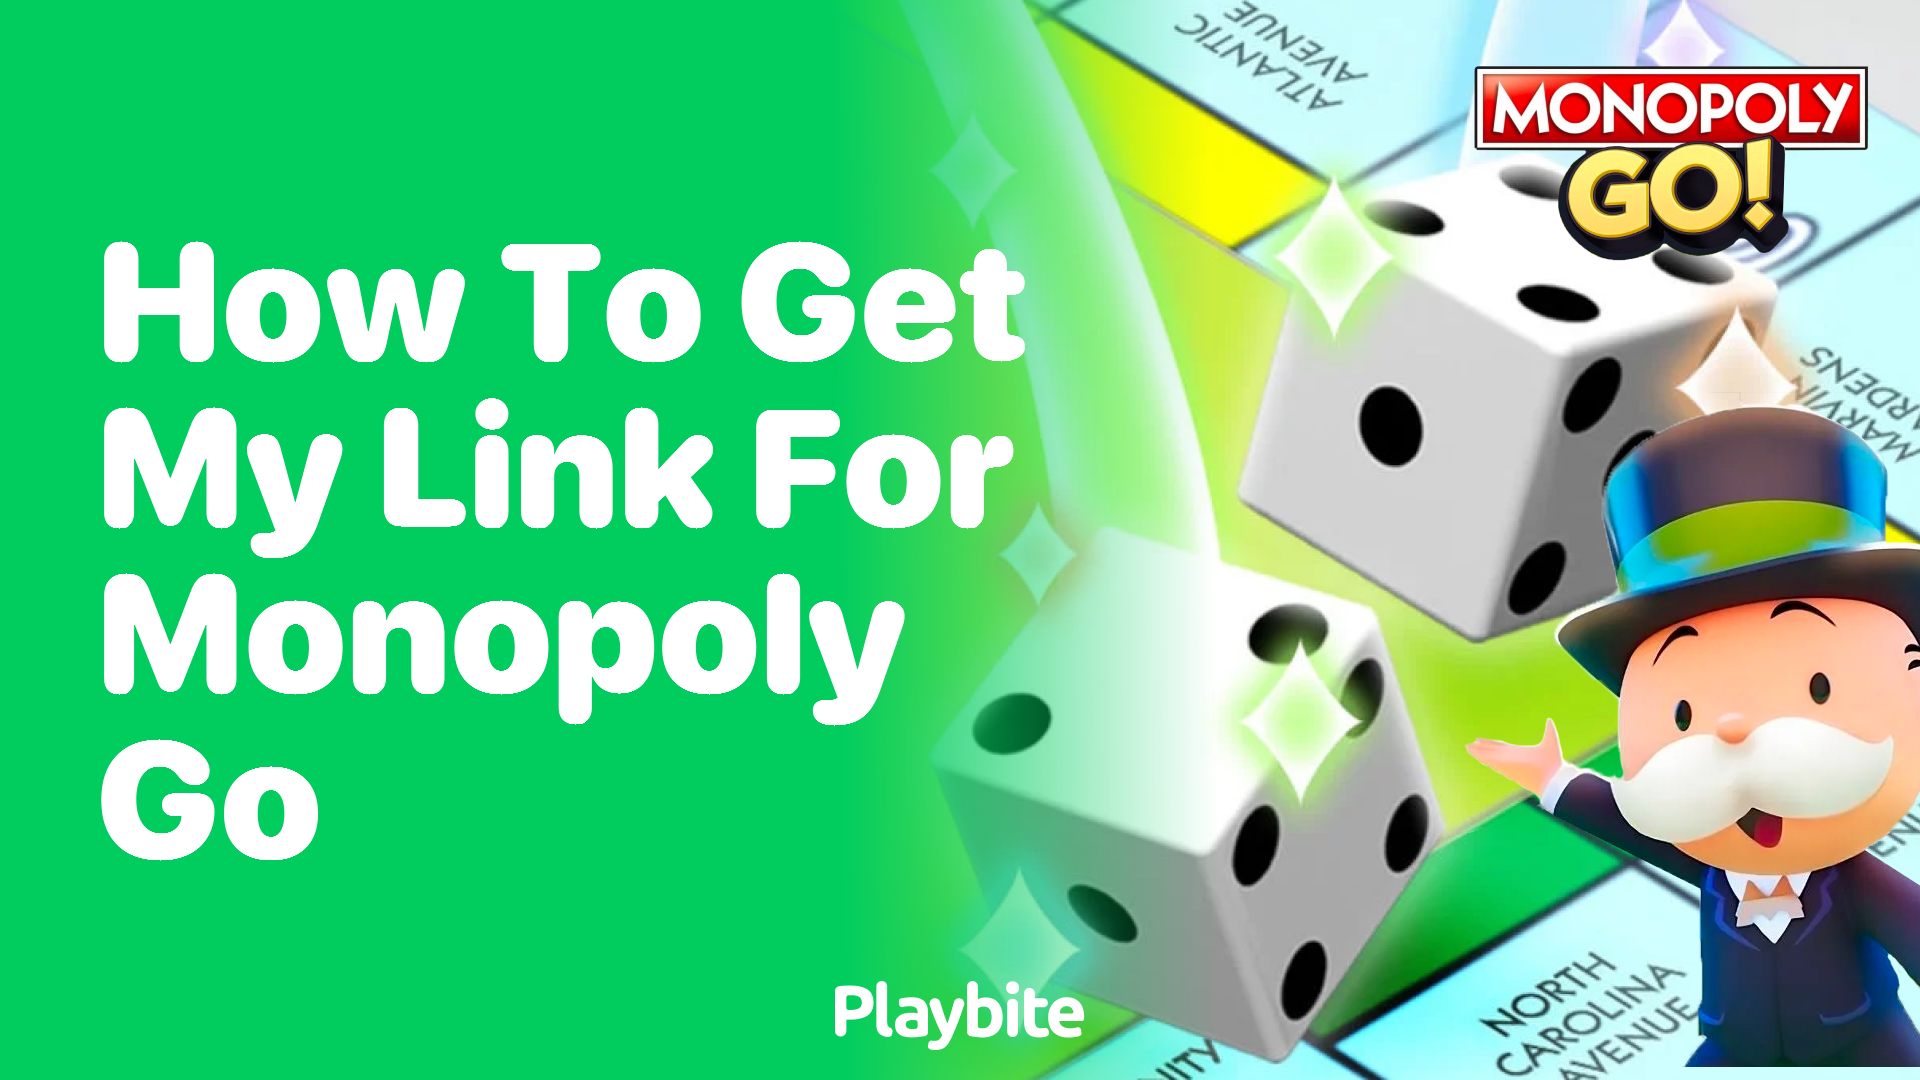 How to Get Your Link for Monopoly Go: A Simple Guide